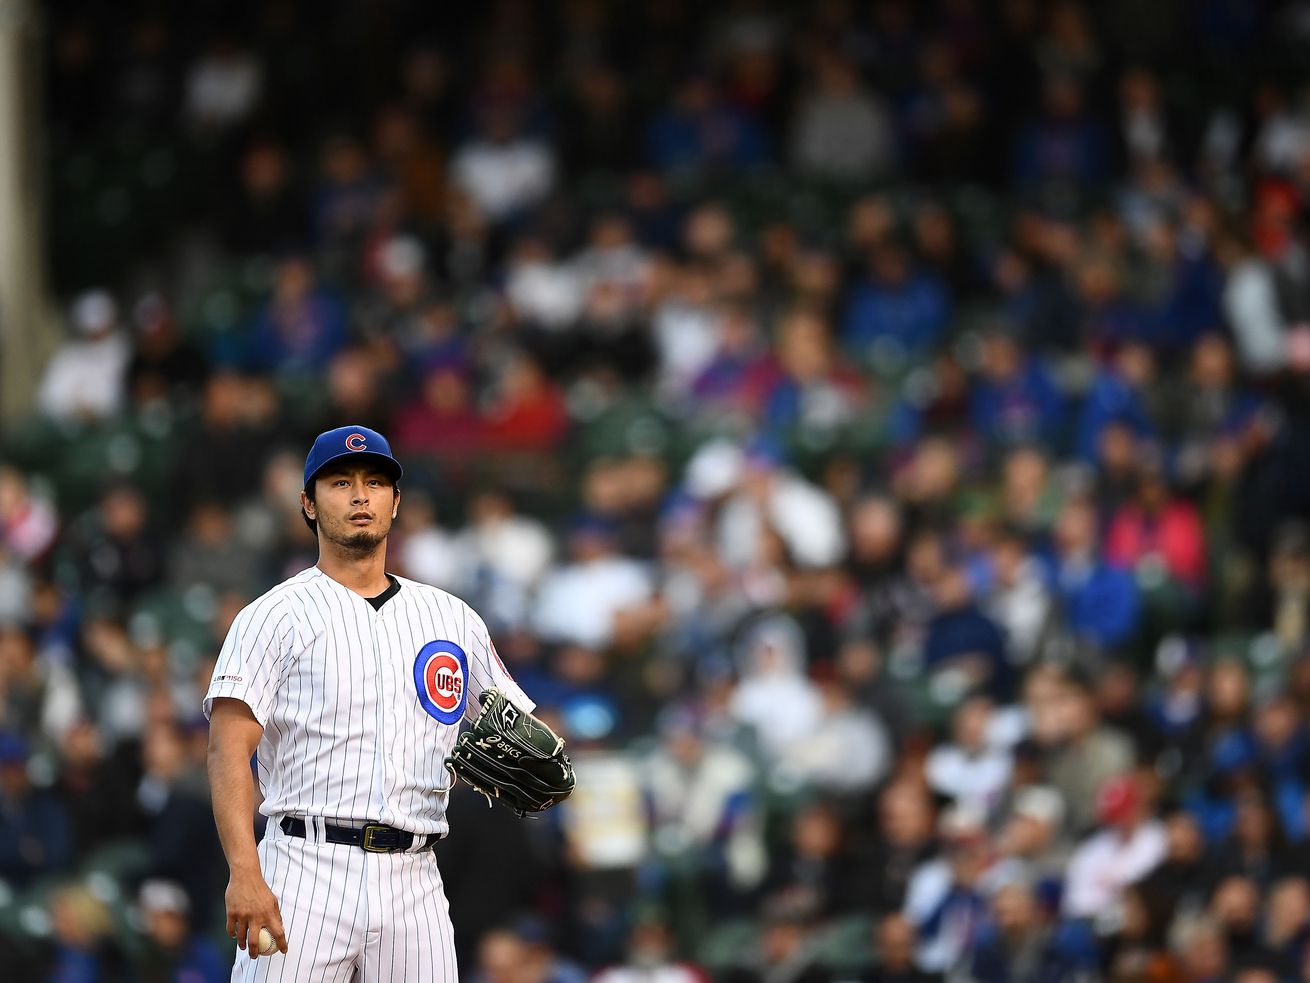 Darvish early in Monday night’s start against the Phillies and Jake Arrieta.